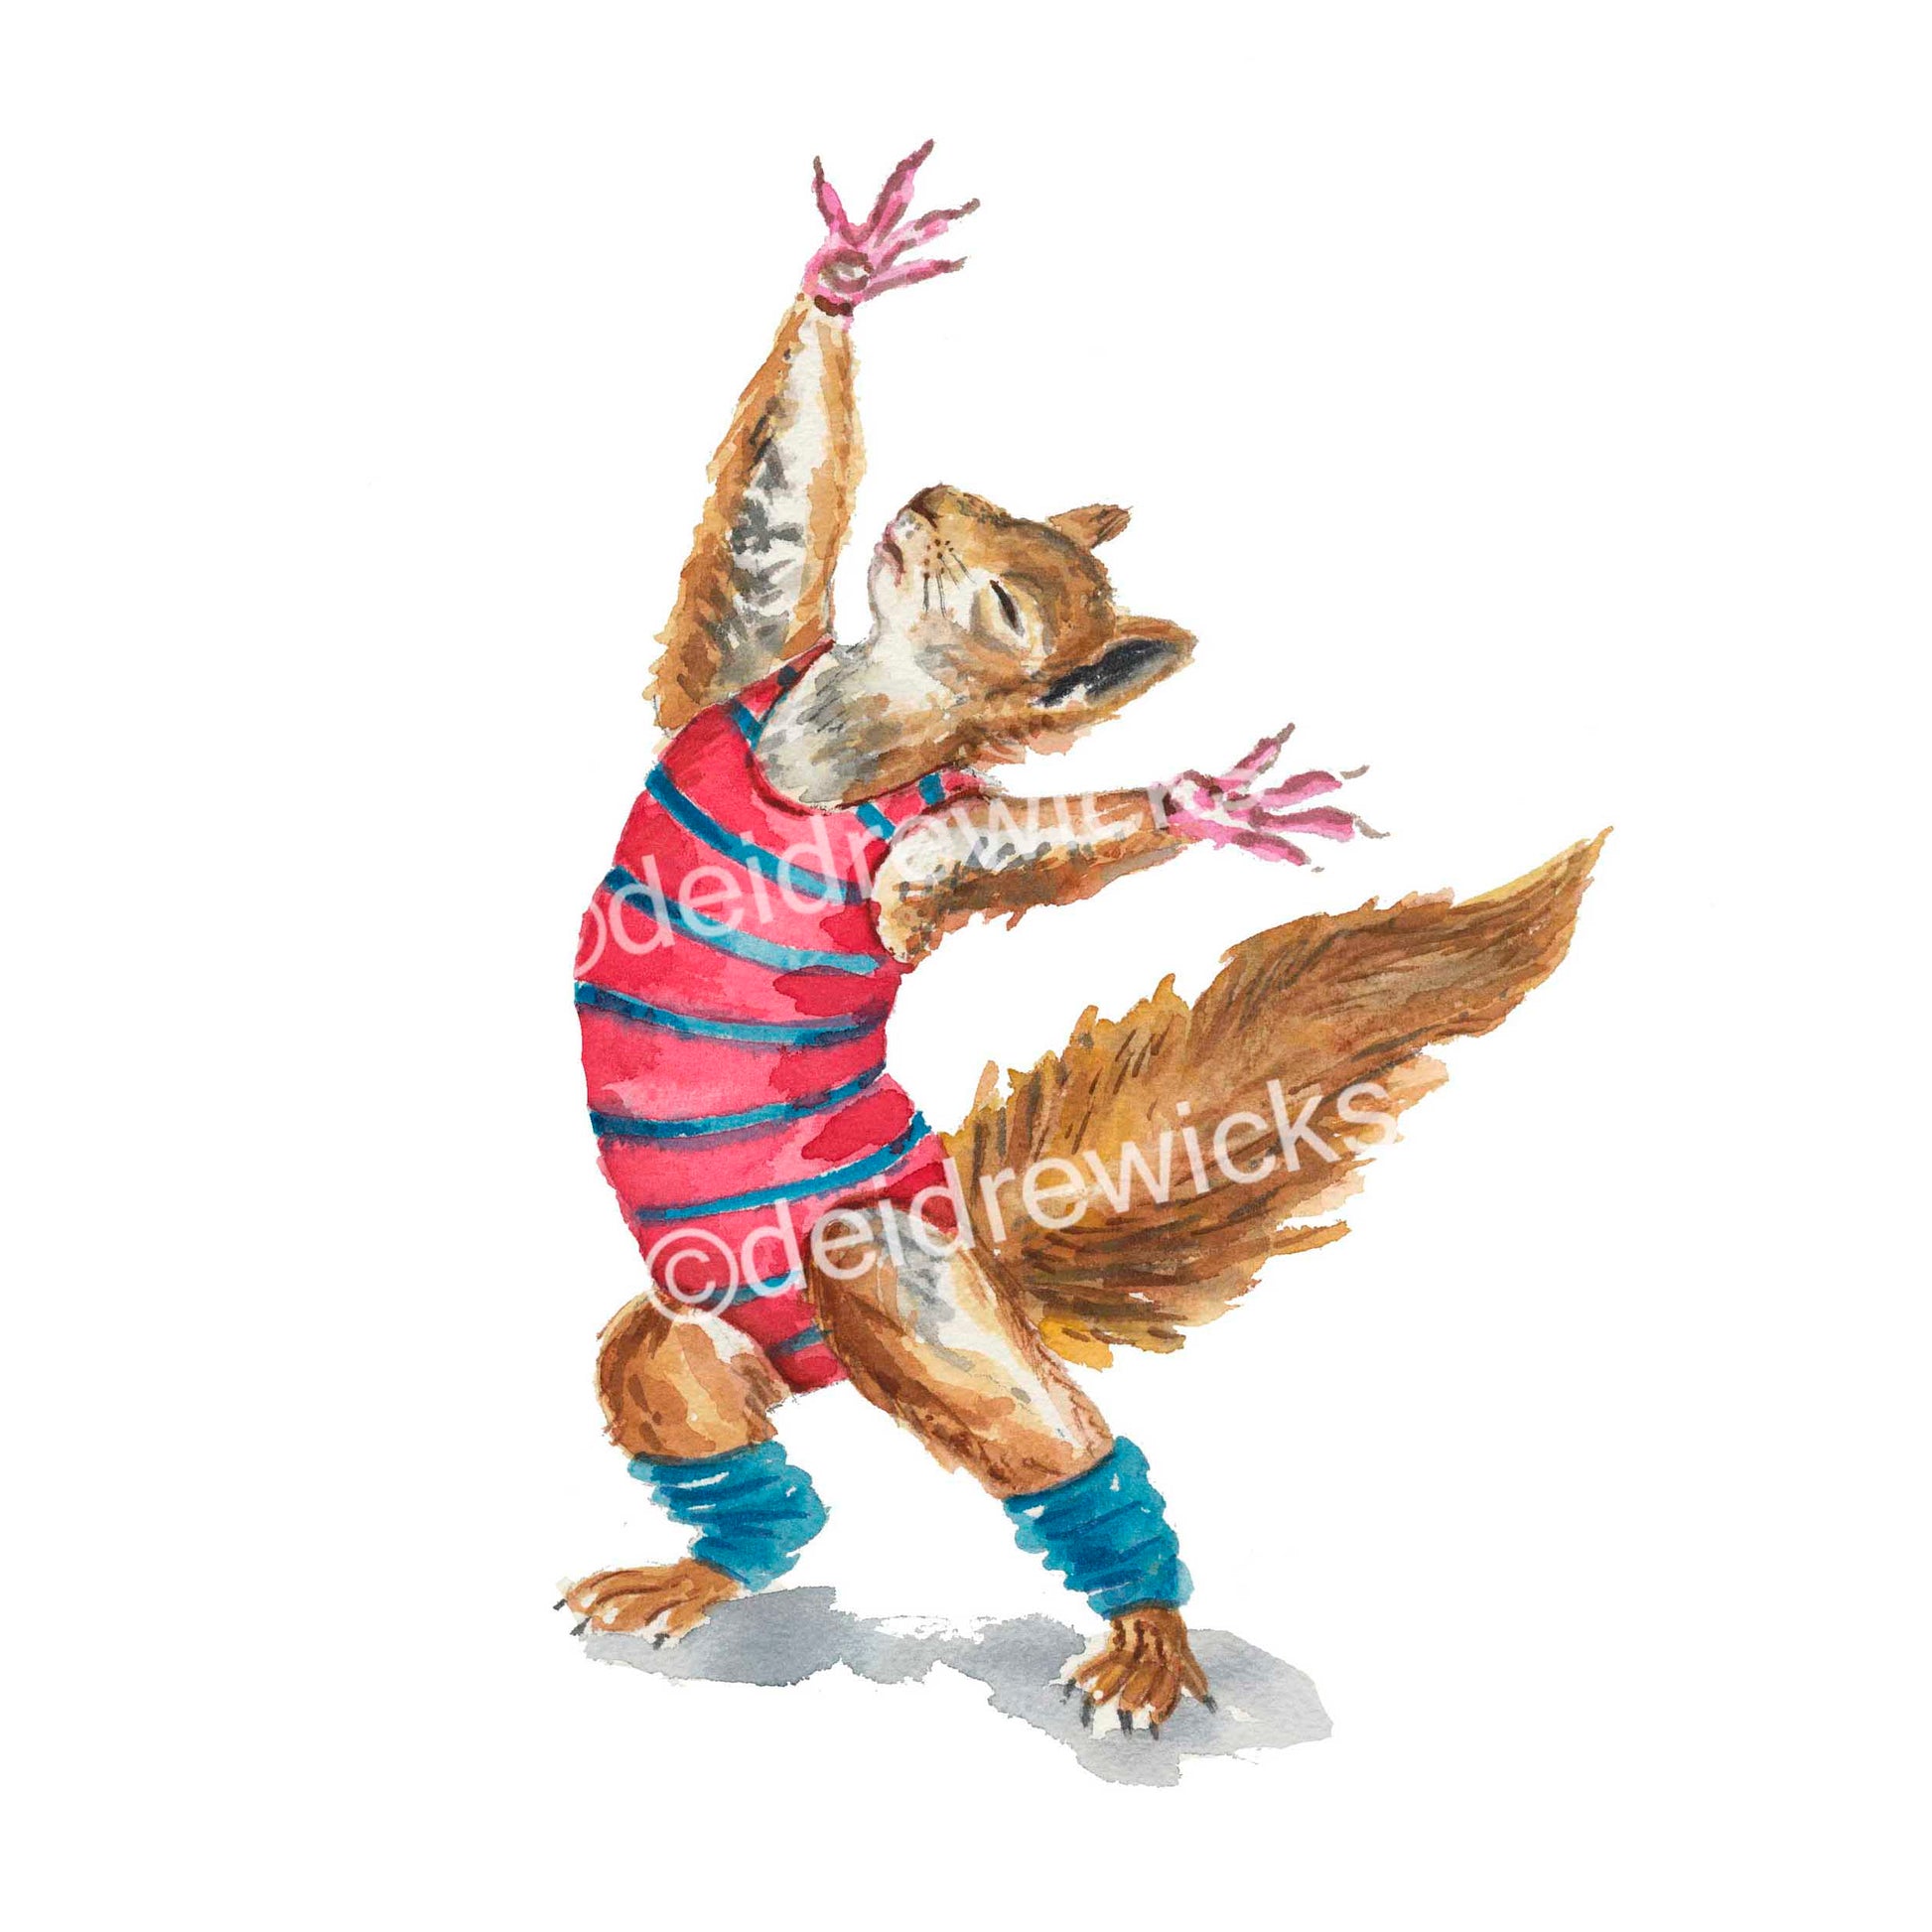 Watercolour print of a squirrel in 80s exercise cloths dancing